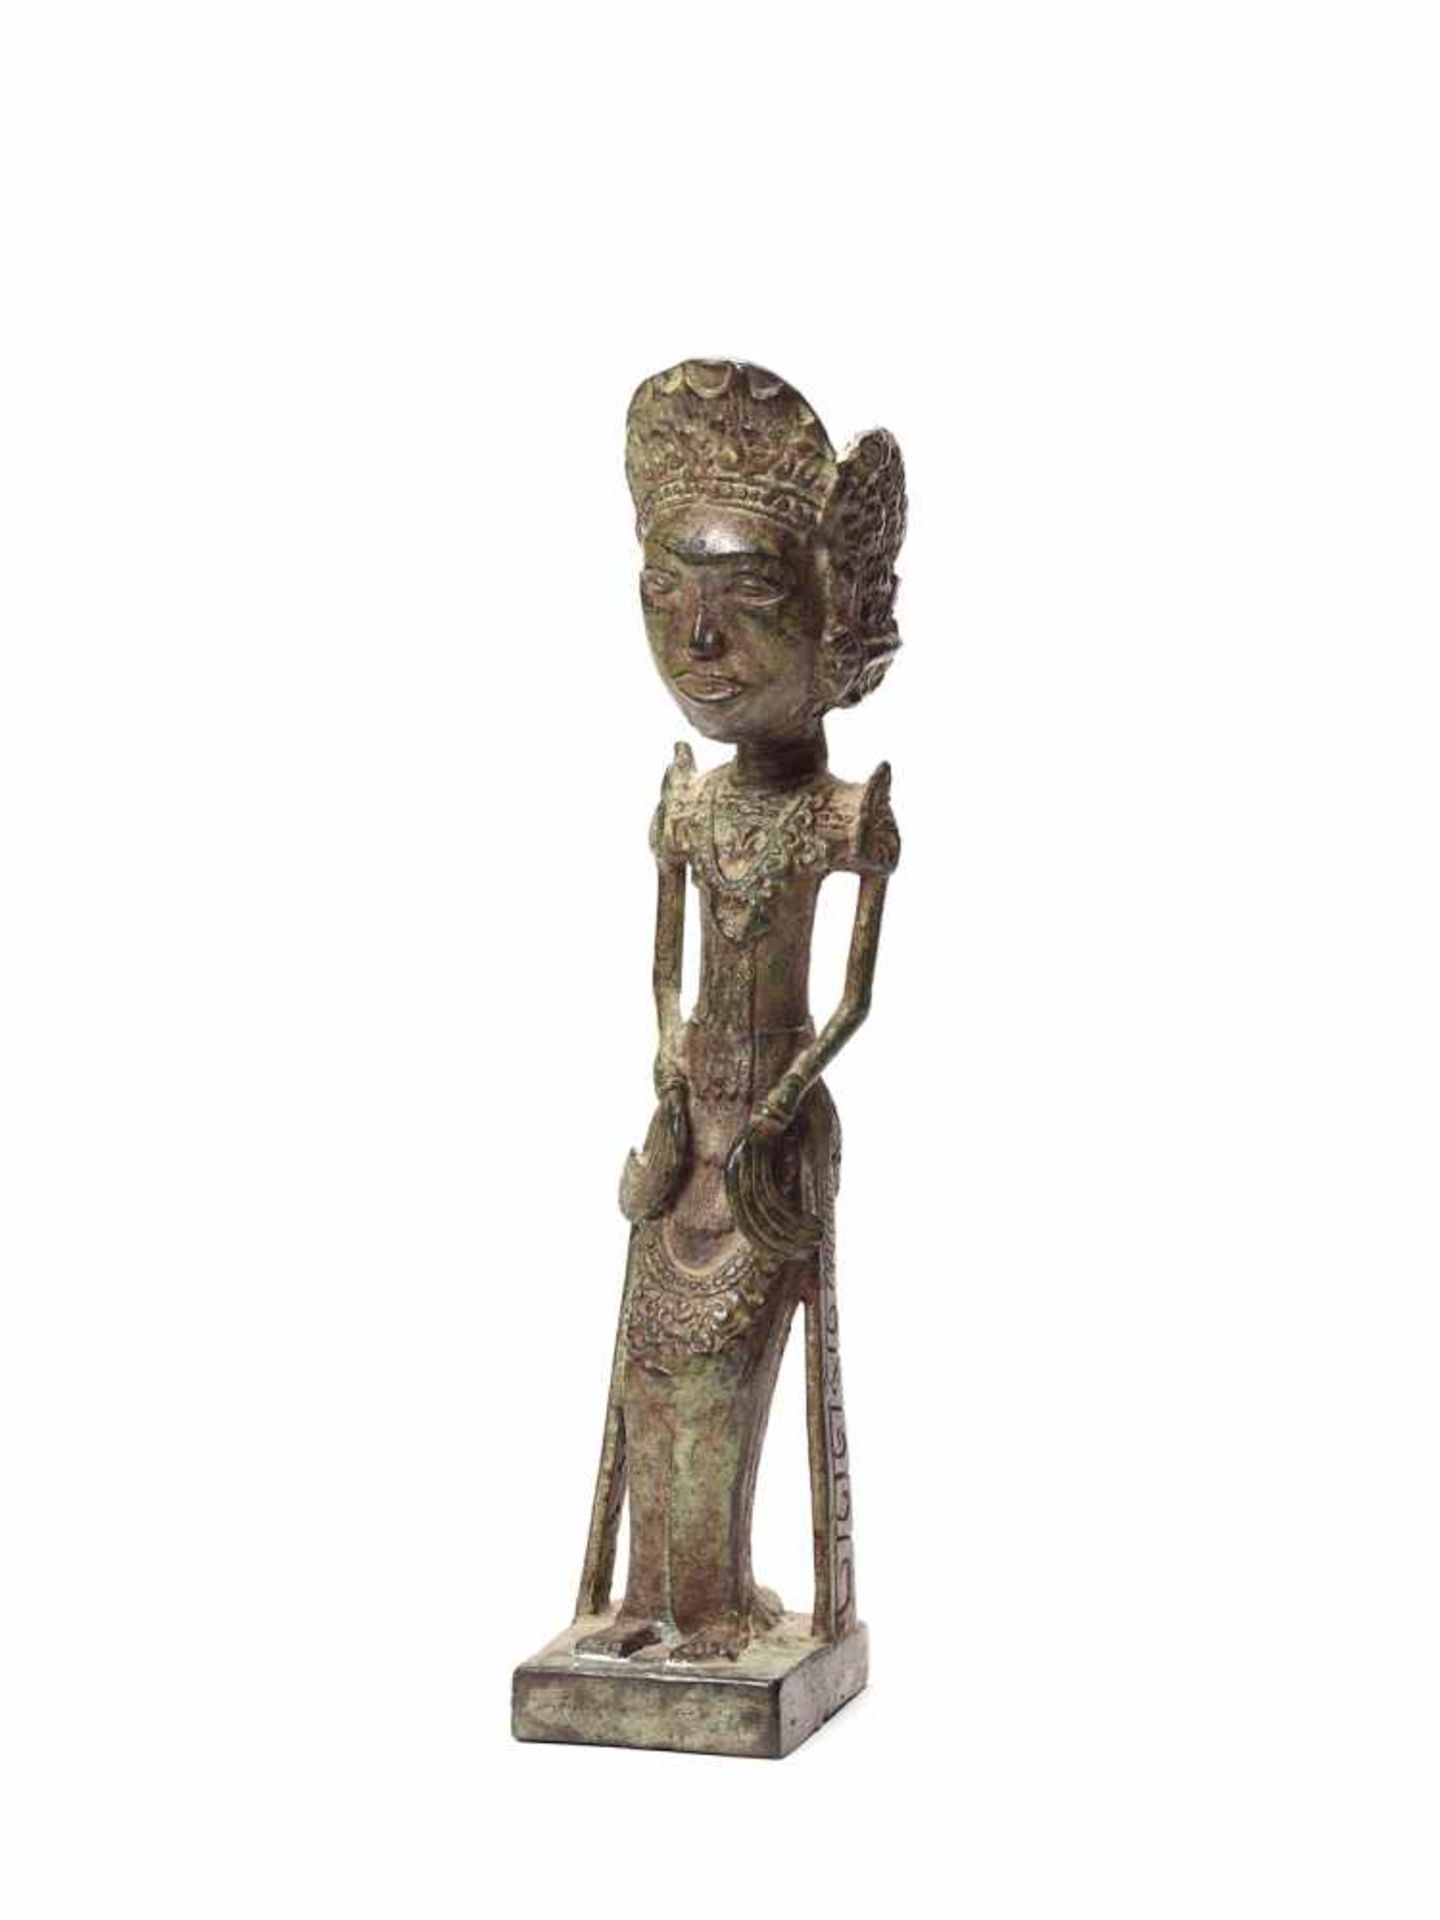 AN UNUSUAL THAI BRONZE FIGURE OF A PRINCESS OR NOBLE WOMAN, EARLY 1900s